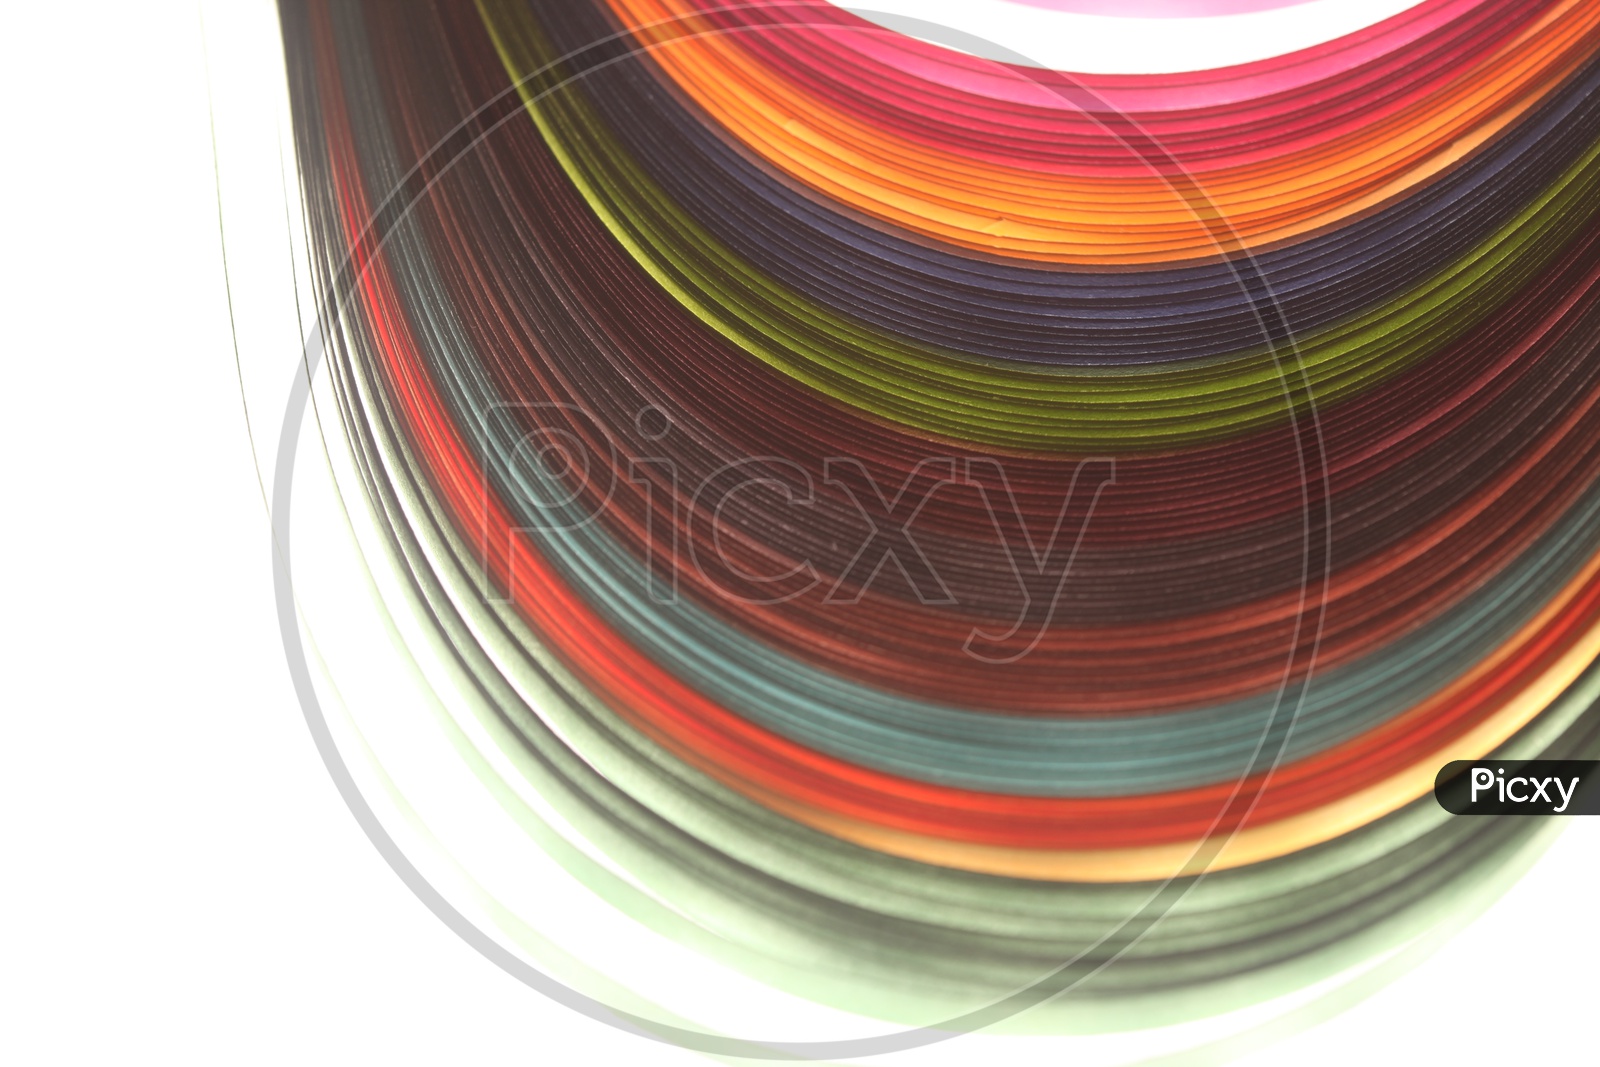 colorful layered abstract design  for background use